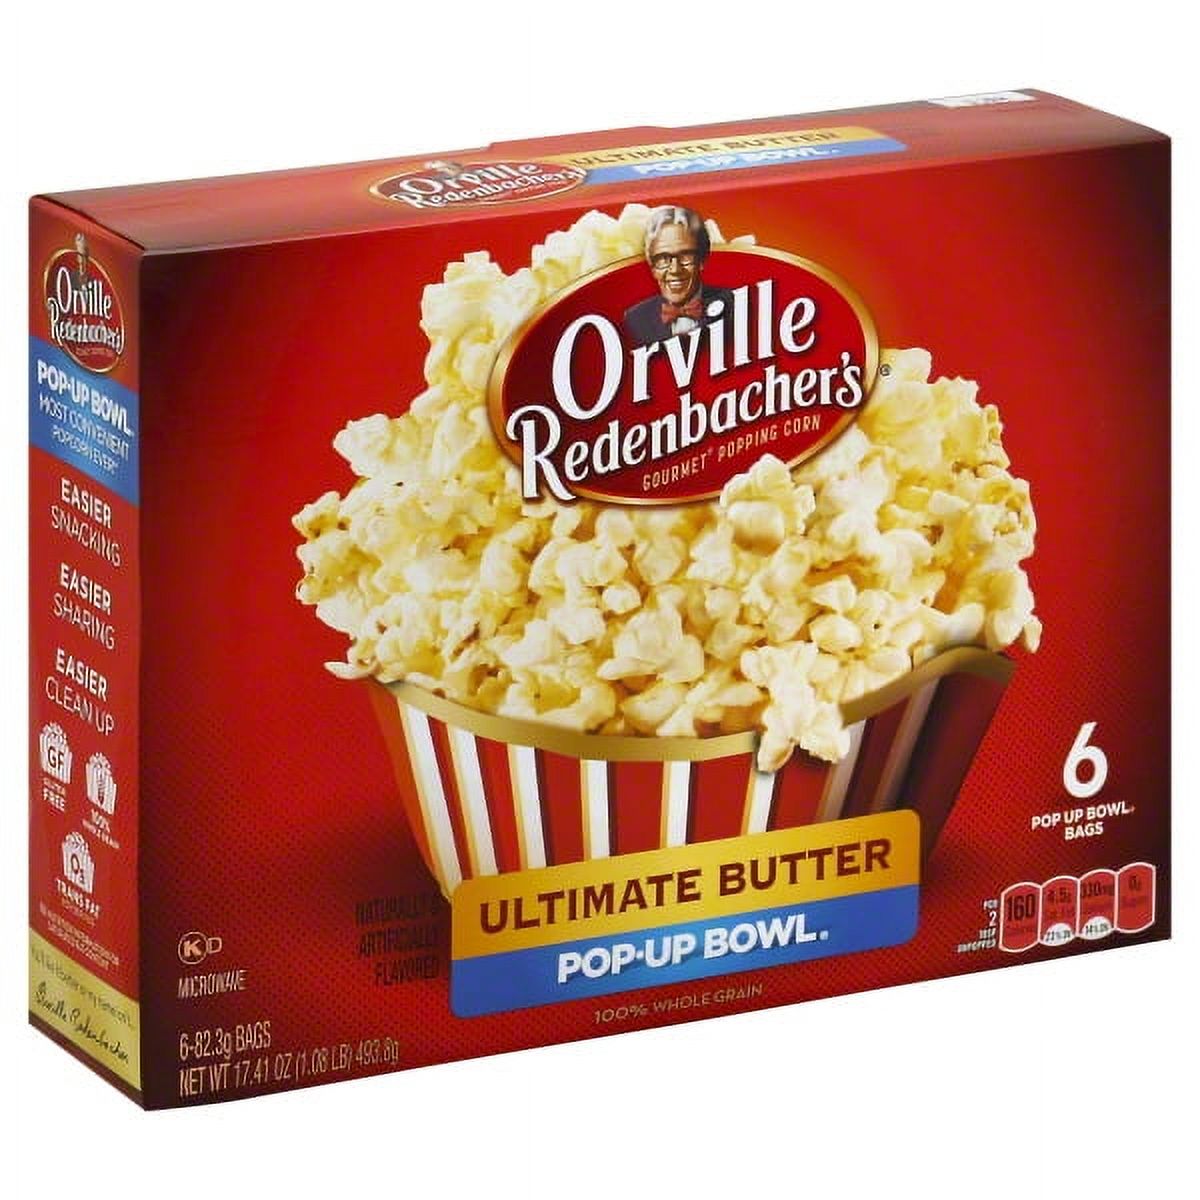 Orville Redenbachers Ultimate Butter Microwave Popcorn Pop Up Bowl 82.3g 6 Count - image 1 of 13